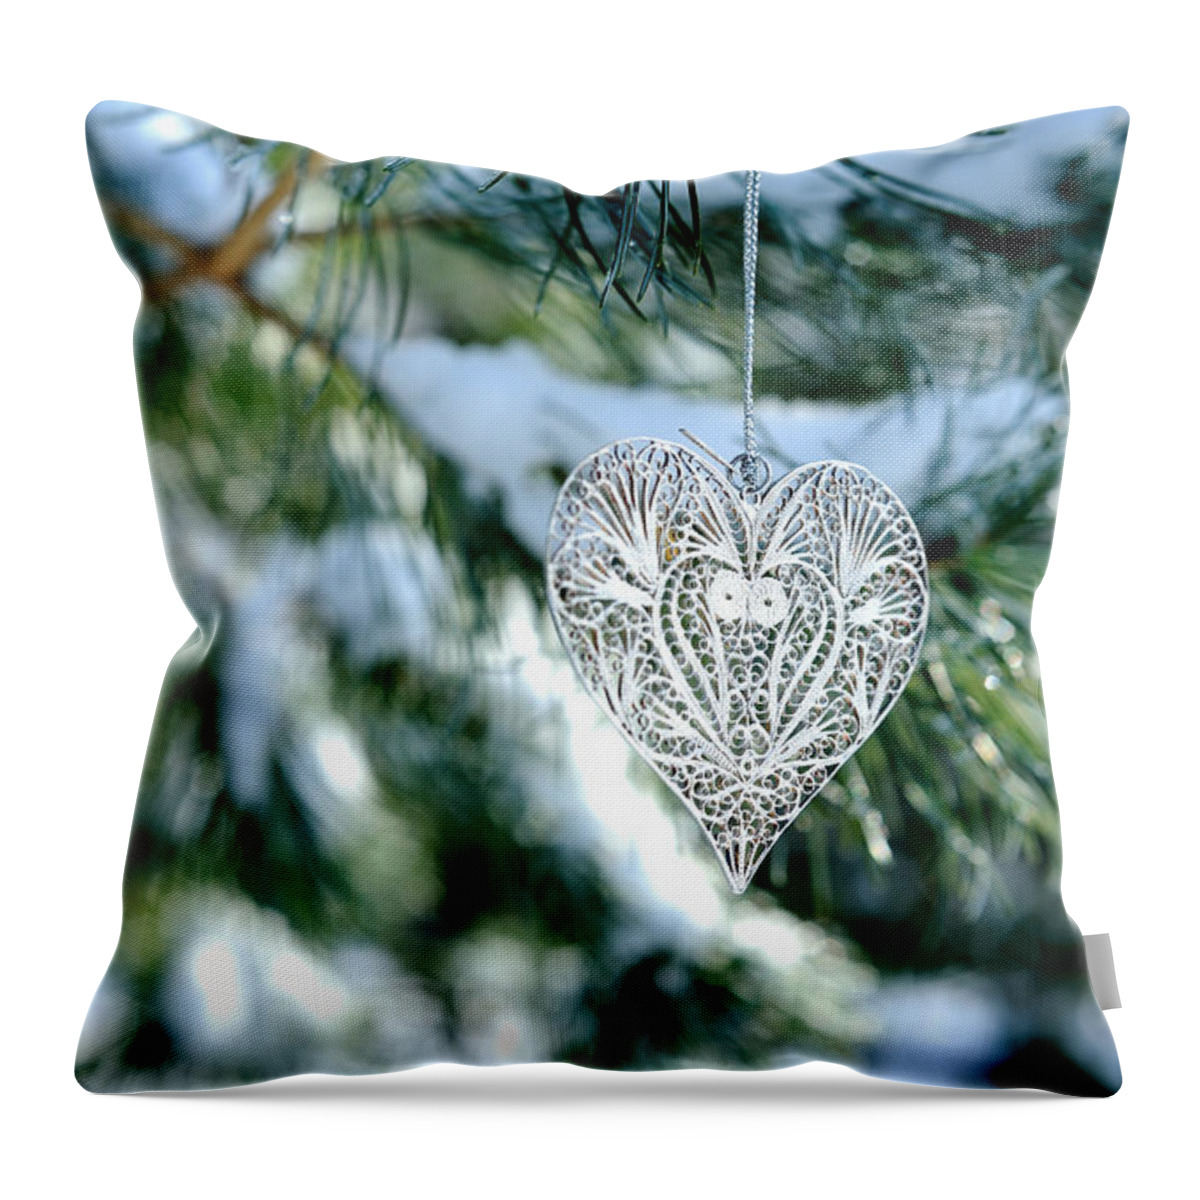 Christmas Card Throw Pillow featuring the photograph Heart Ornament on Snowy Pine Tree by Marianne Campolongo